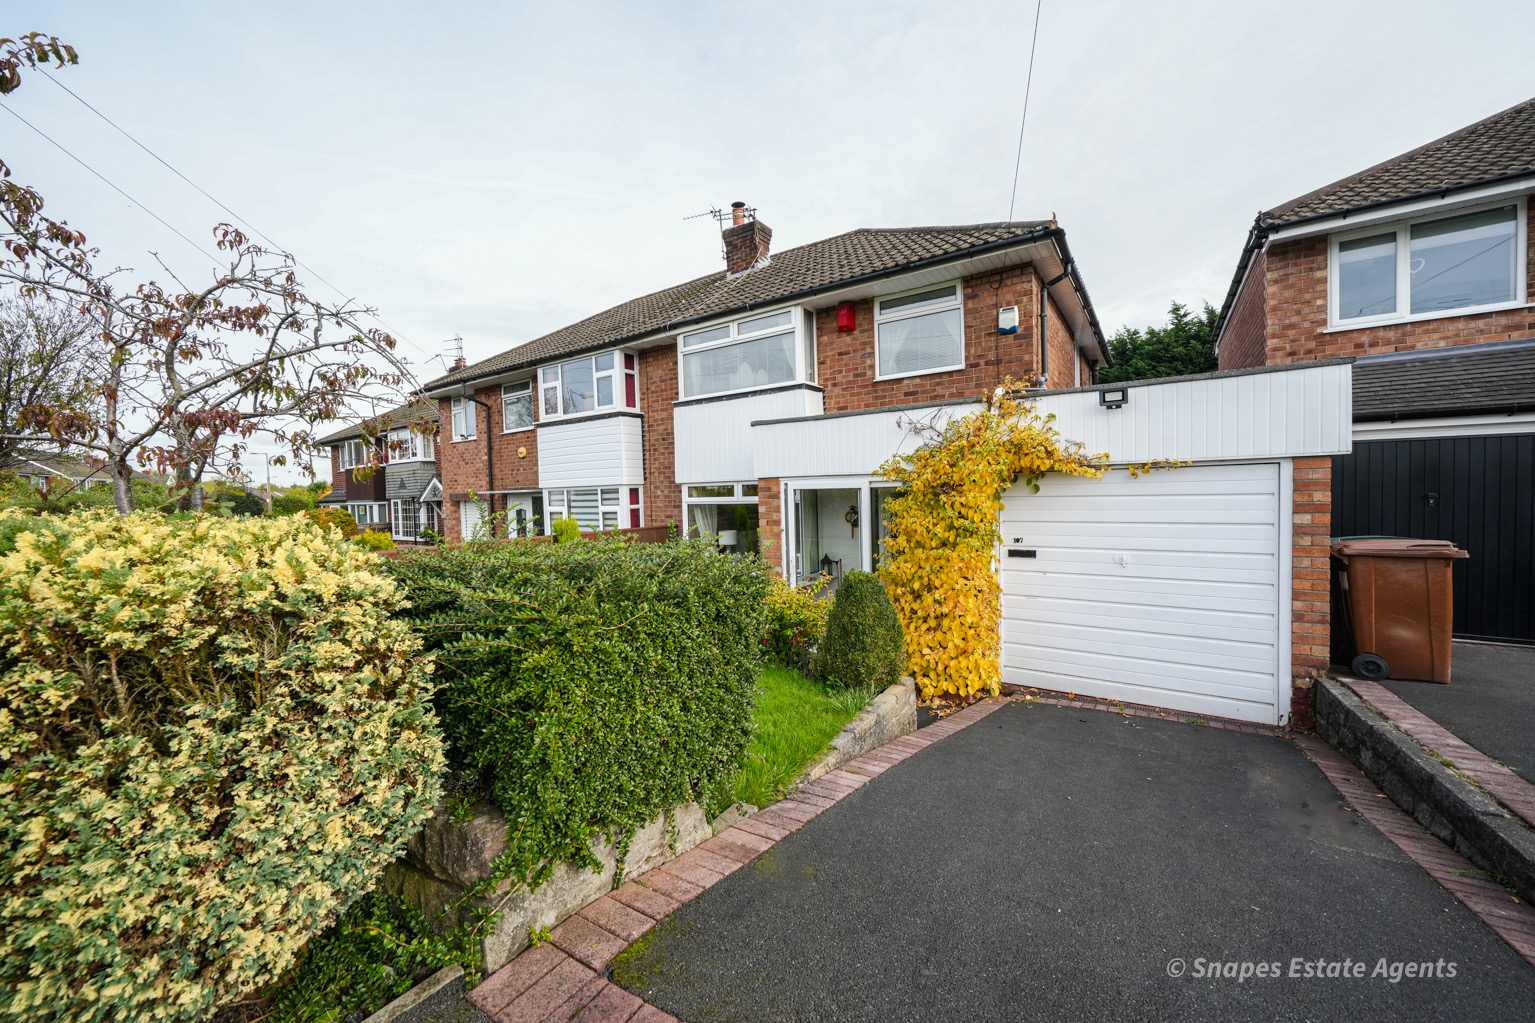 Images for Adelaide Road, Bramhall, Stockport SK7 1NP